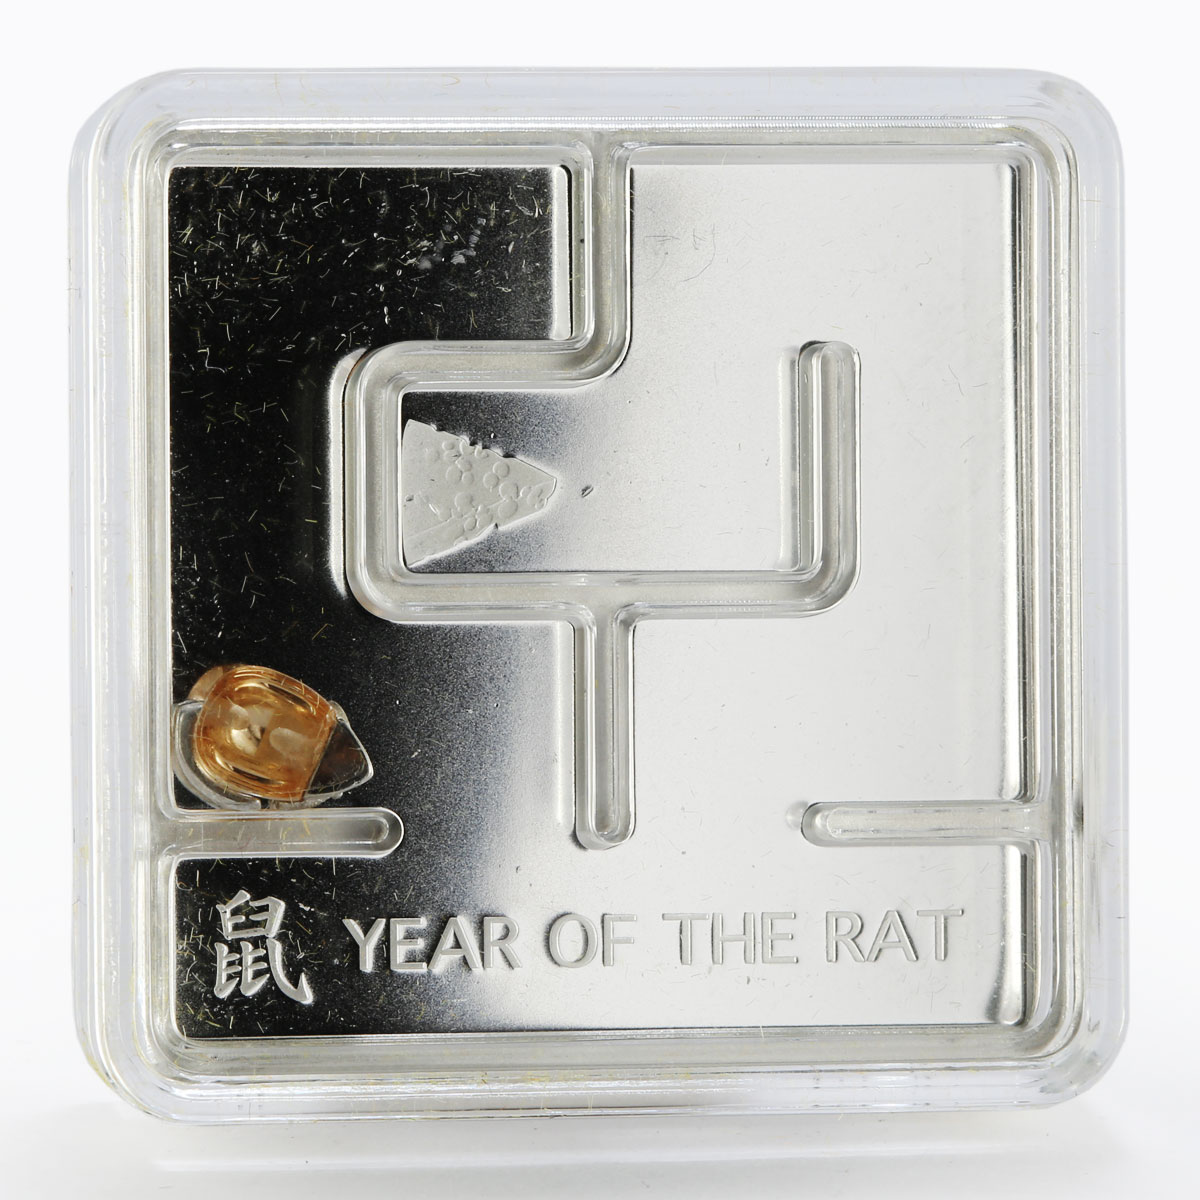 Tanzania 500 shillings Year of the Rat proof silver coin 2020